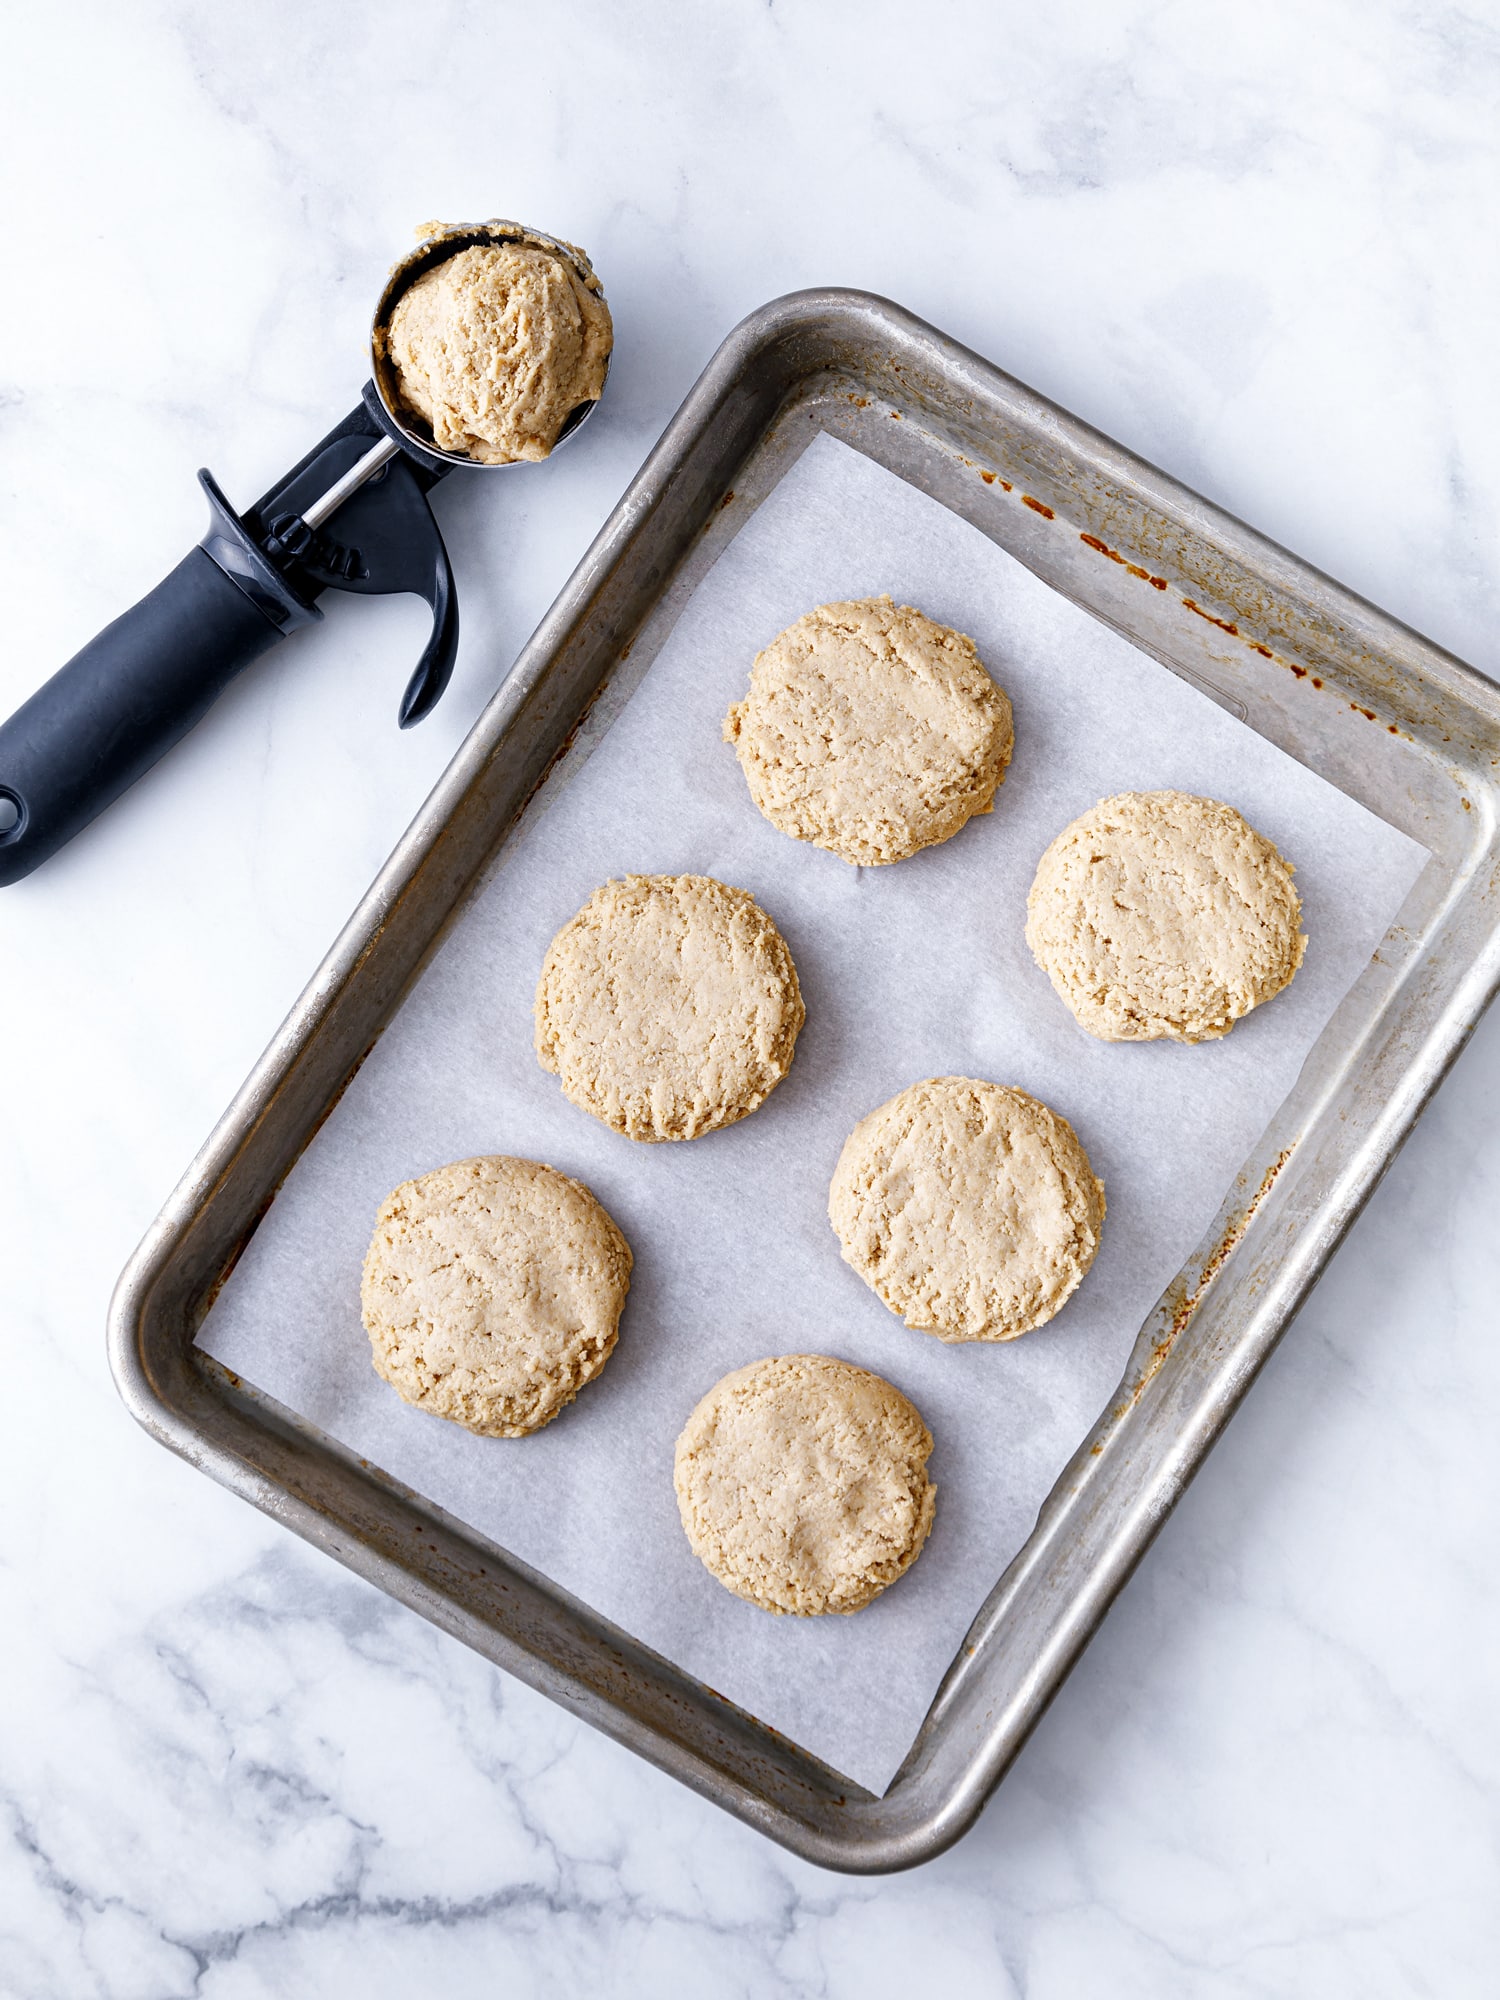 baking sheet covered in parchment paper with 6 drop biscuits padded out with a cookie scoop next to the tray